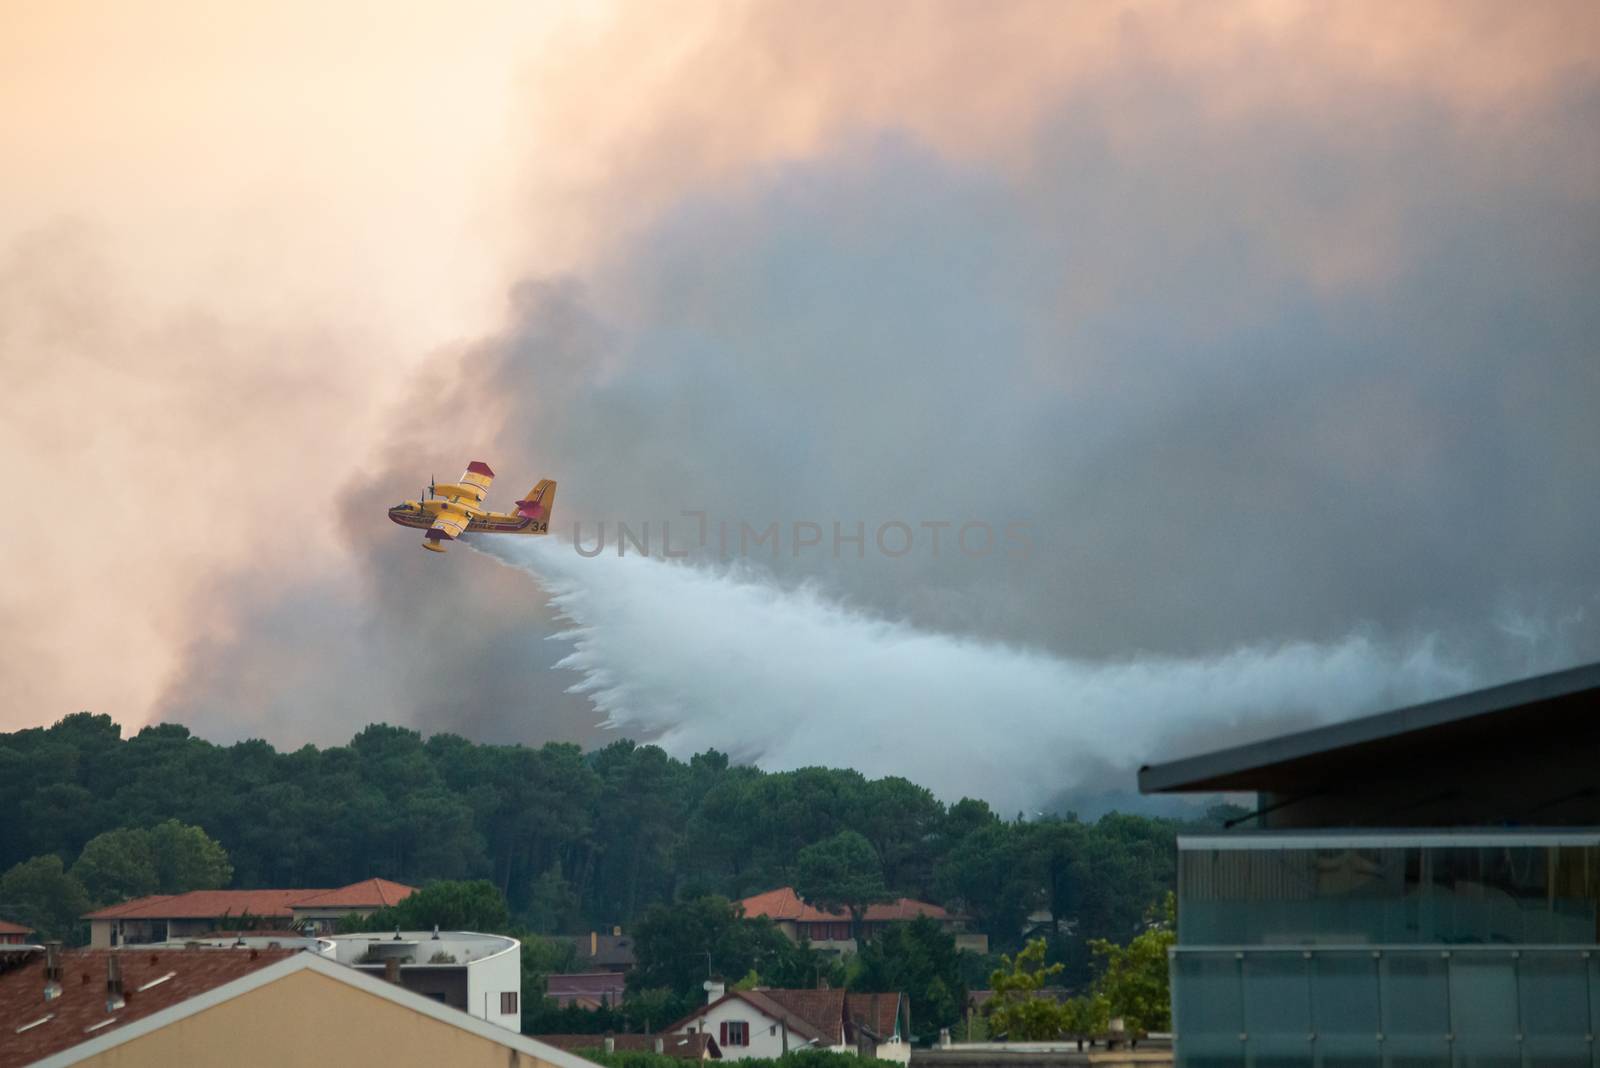 A Canadair dropping water on forest fire in Anglet, France. by dutourdumonde